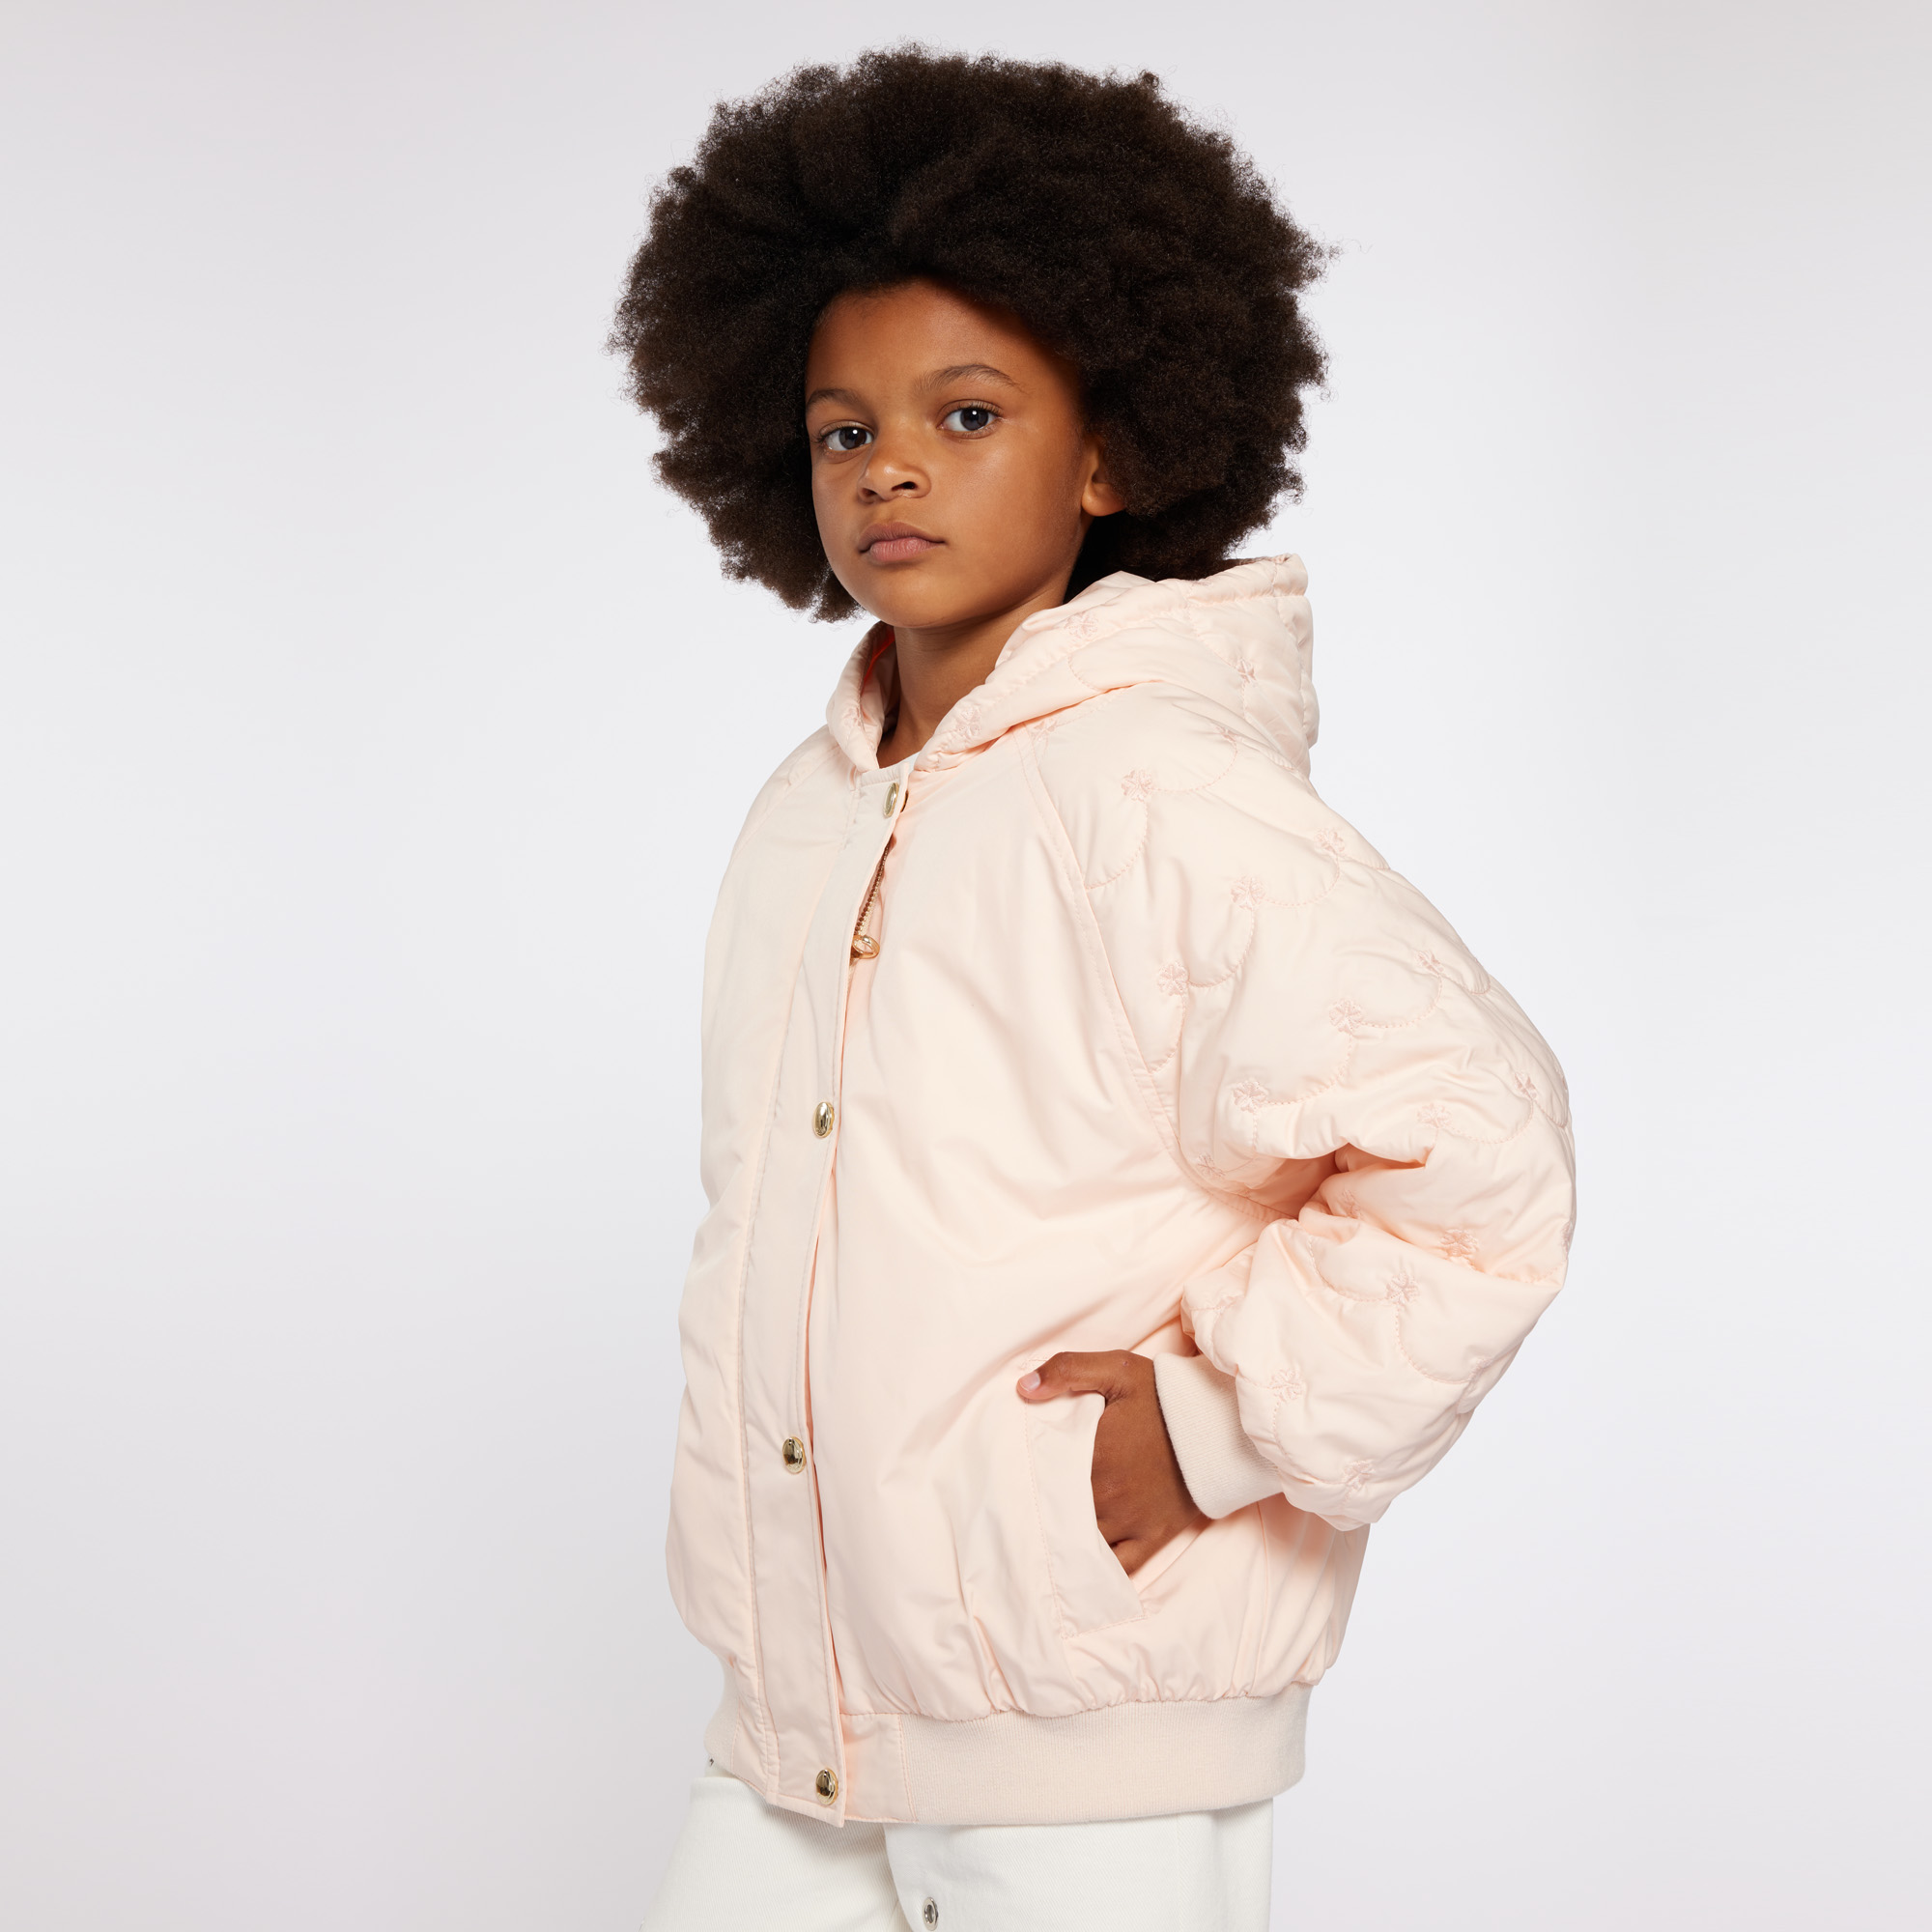 Embroidered hooded jacket CHLOE for GIRL